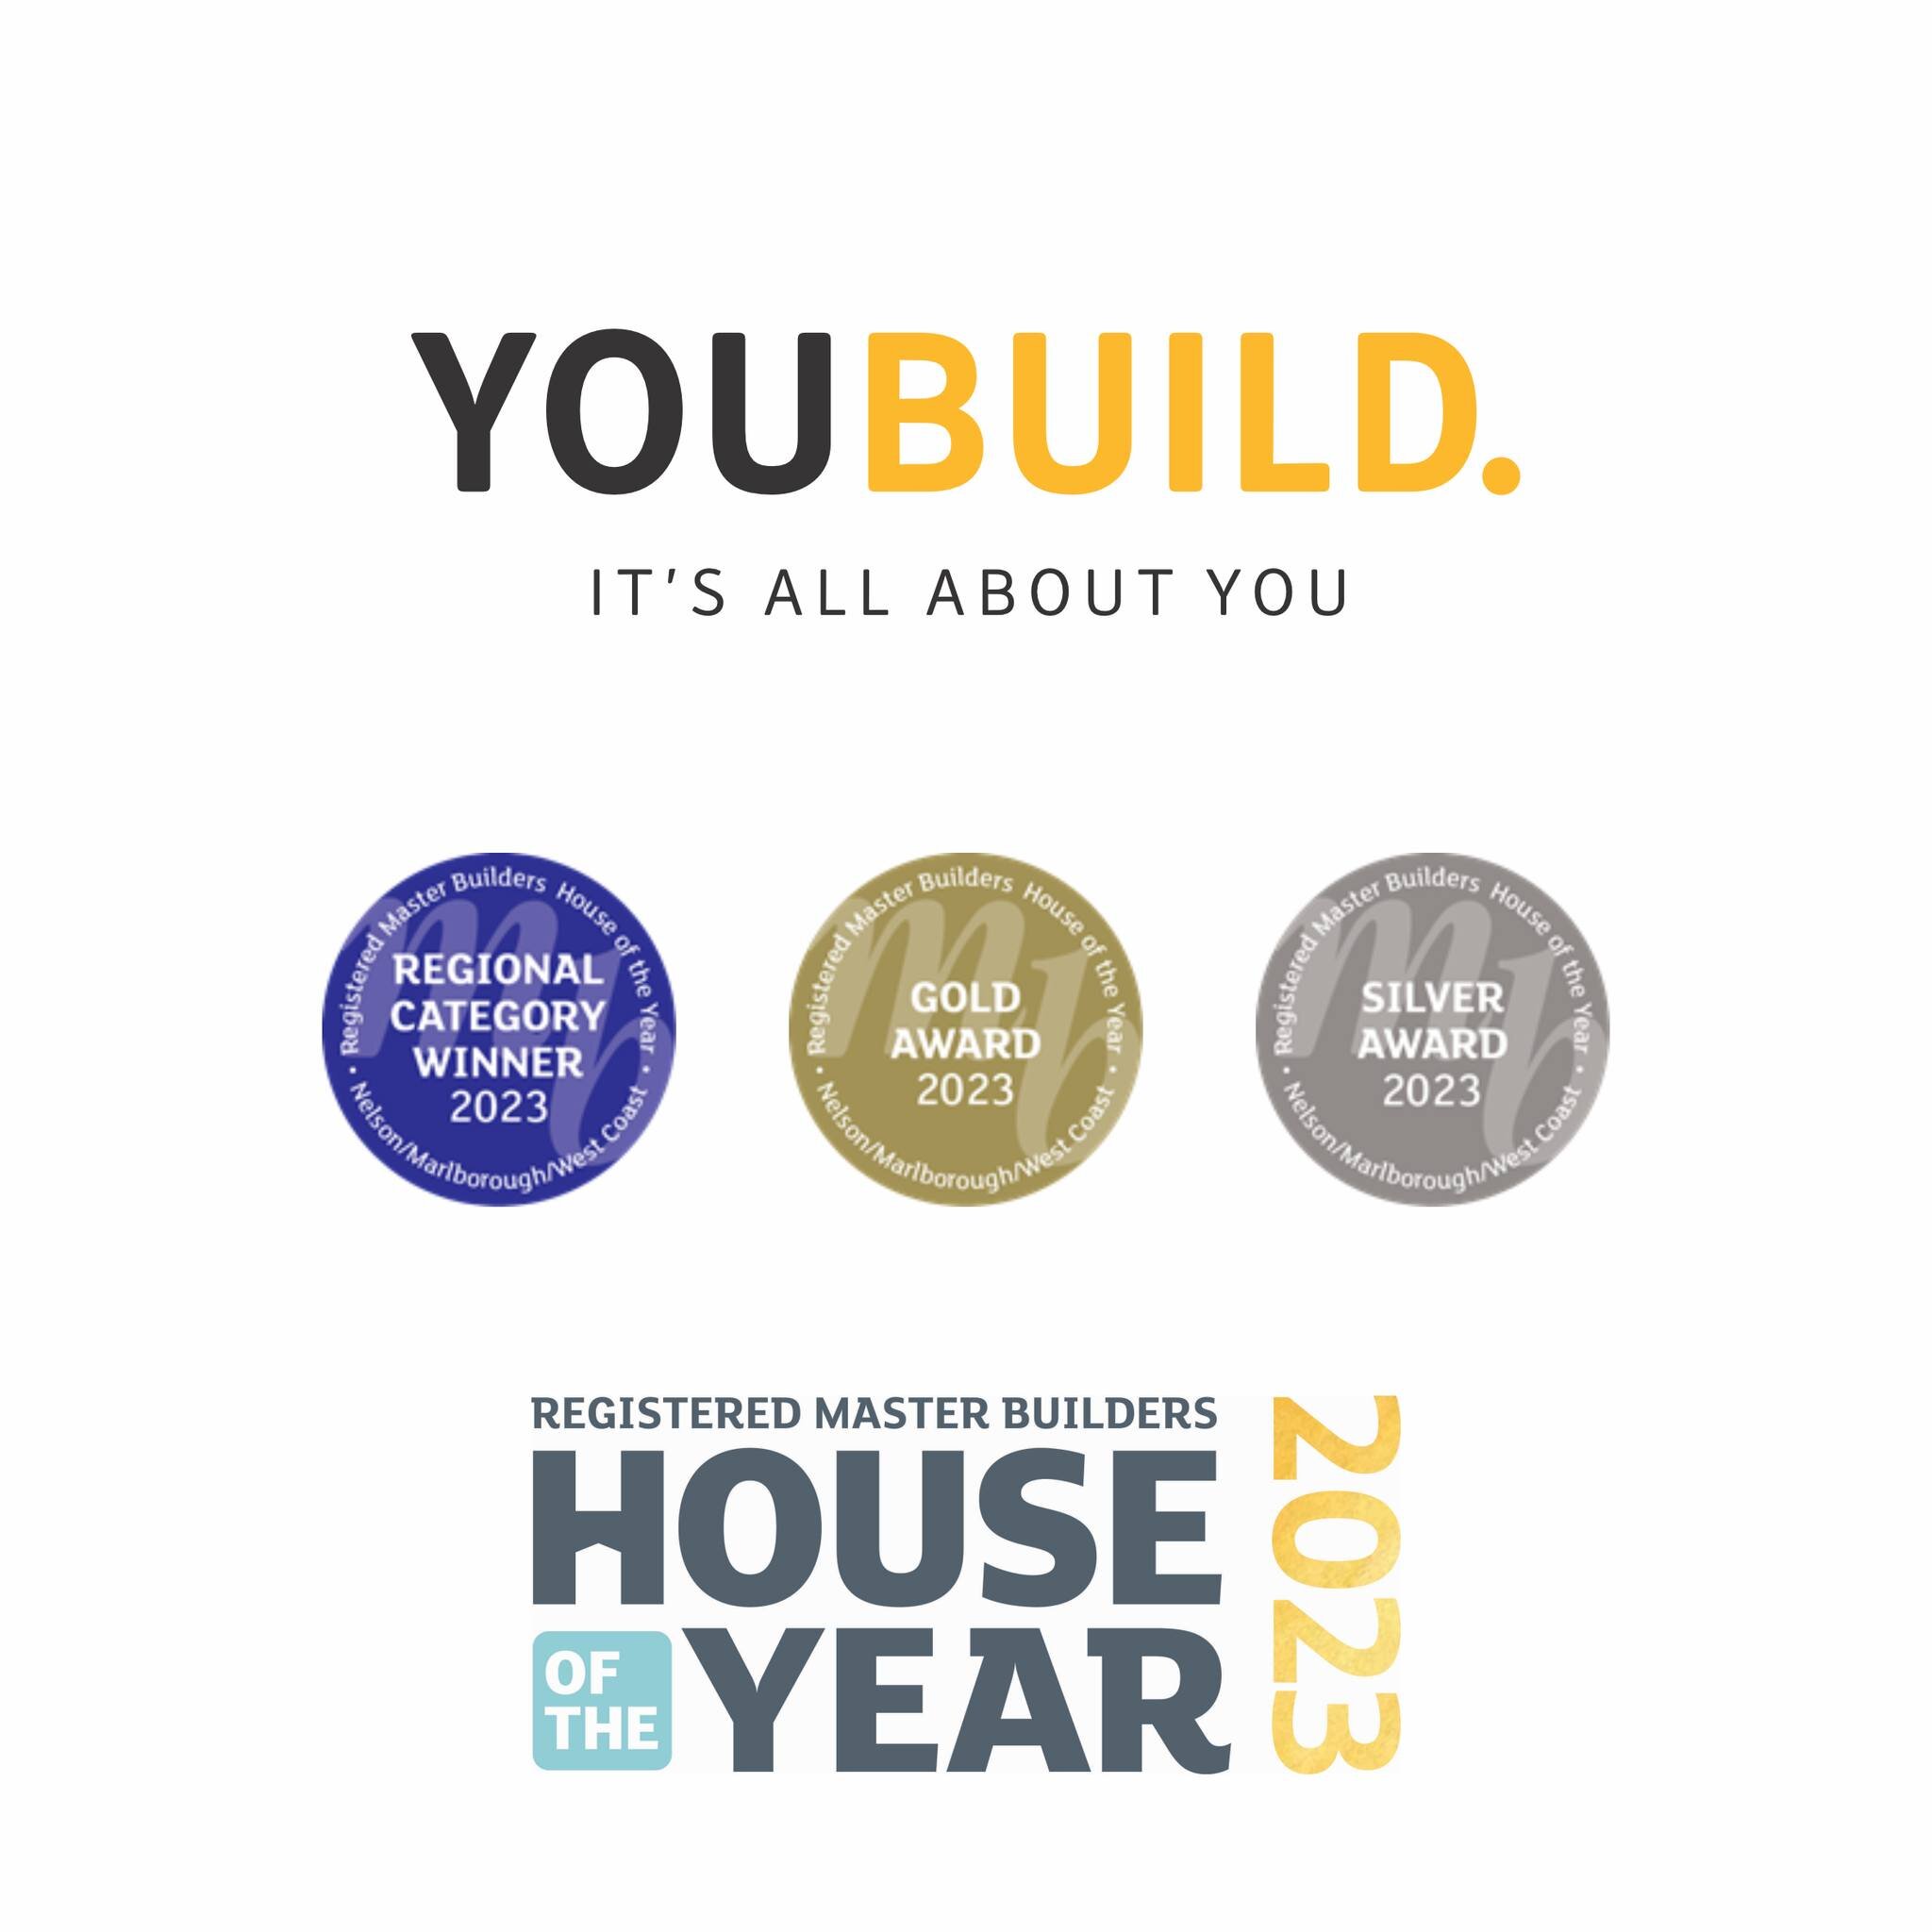 We were super chuffed to take away 3 awards at the ouse of the Year 2023 Master Builder Awards. We won a Gold and Regional Category Winner Award in the New Home $500,000.00 - $750,000.00 CATEGORY for our project in Tahunanui and a Silver Award in the